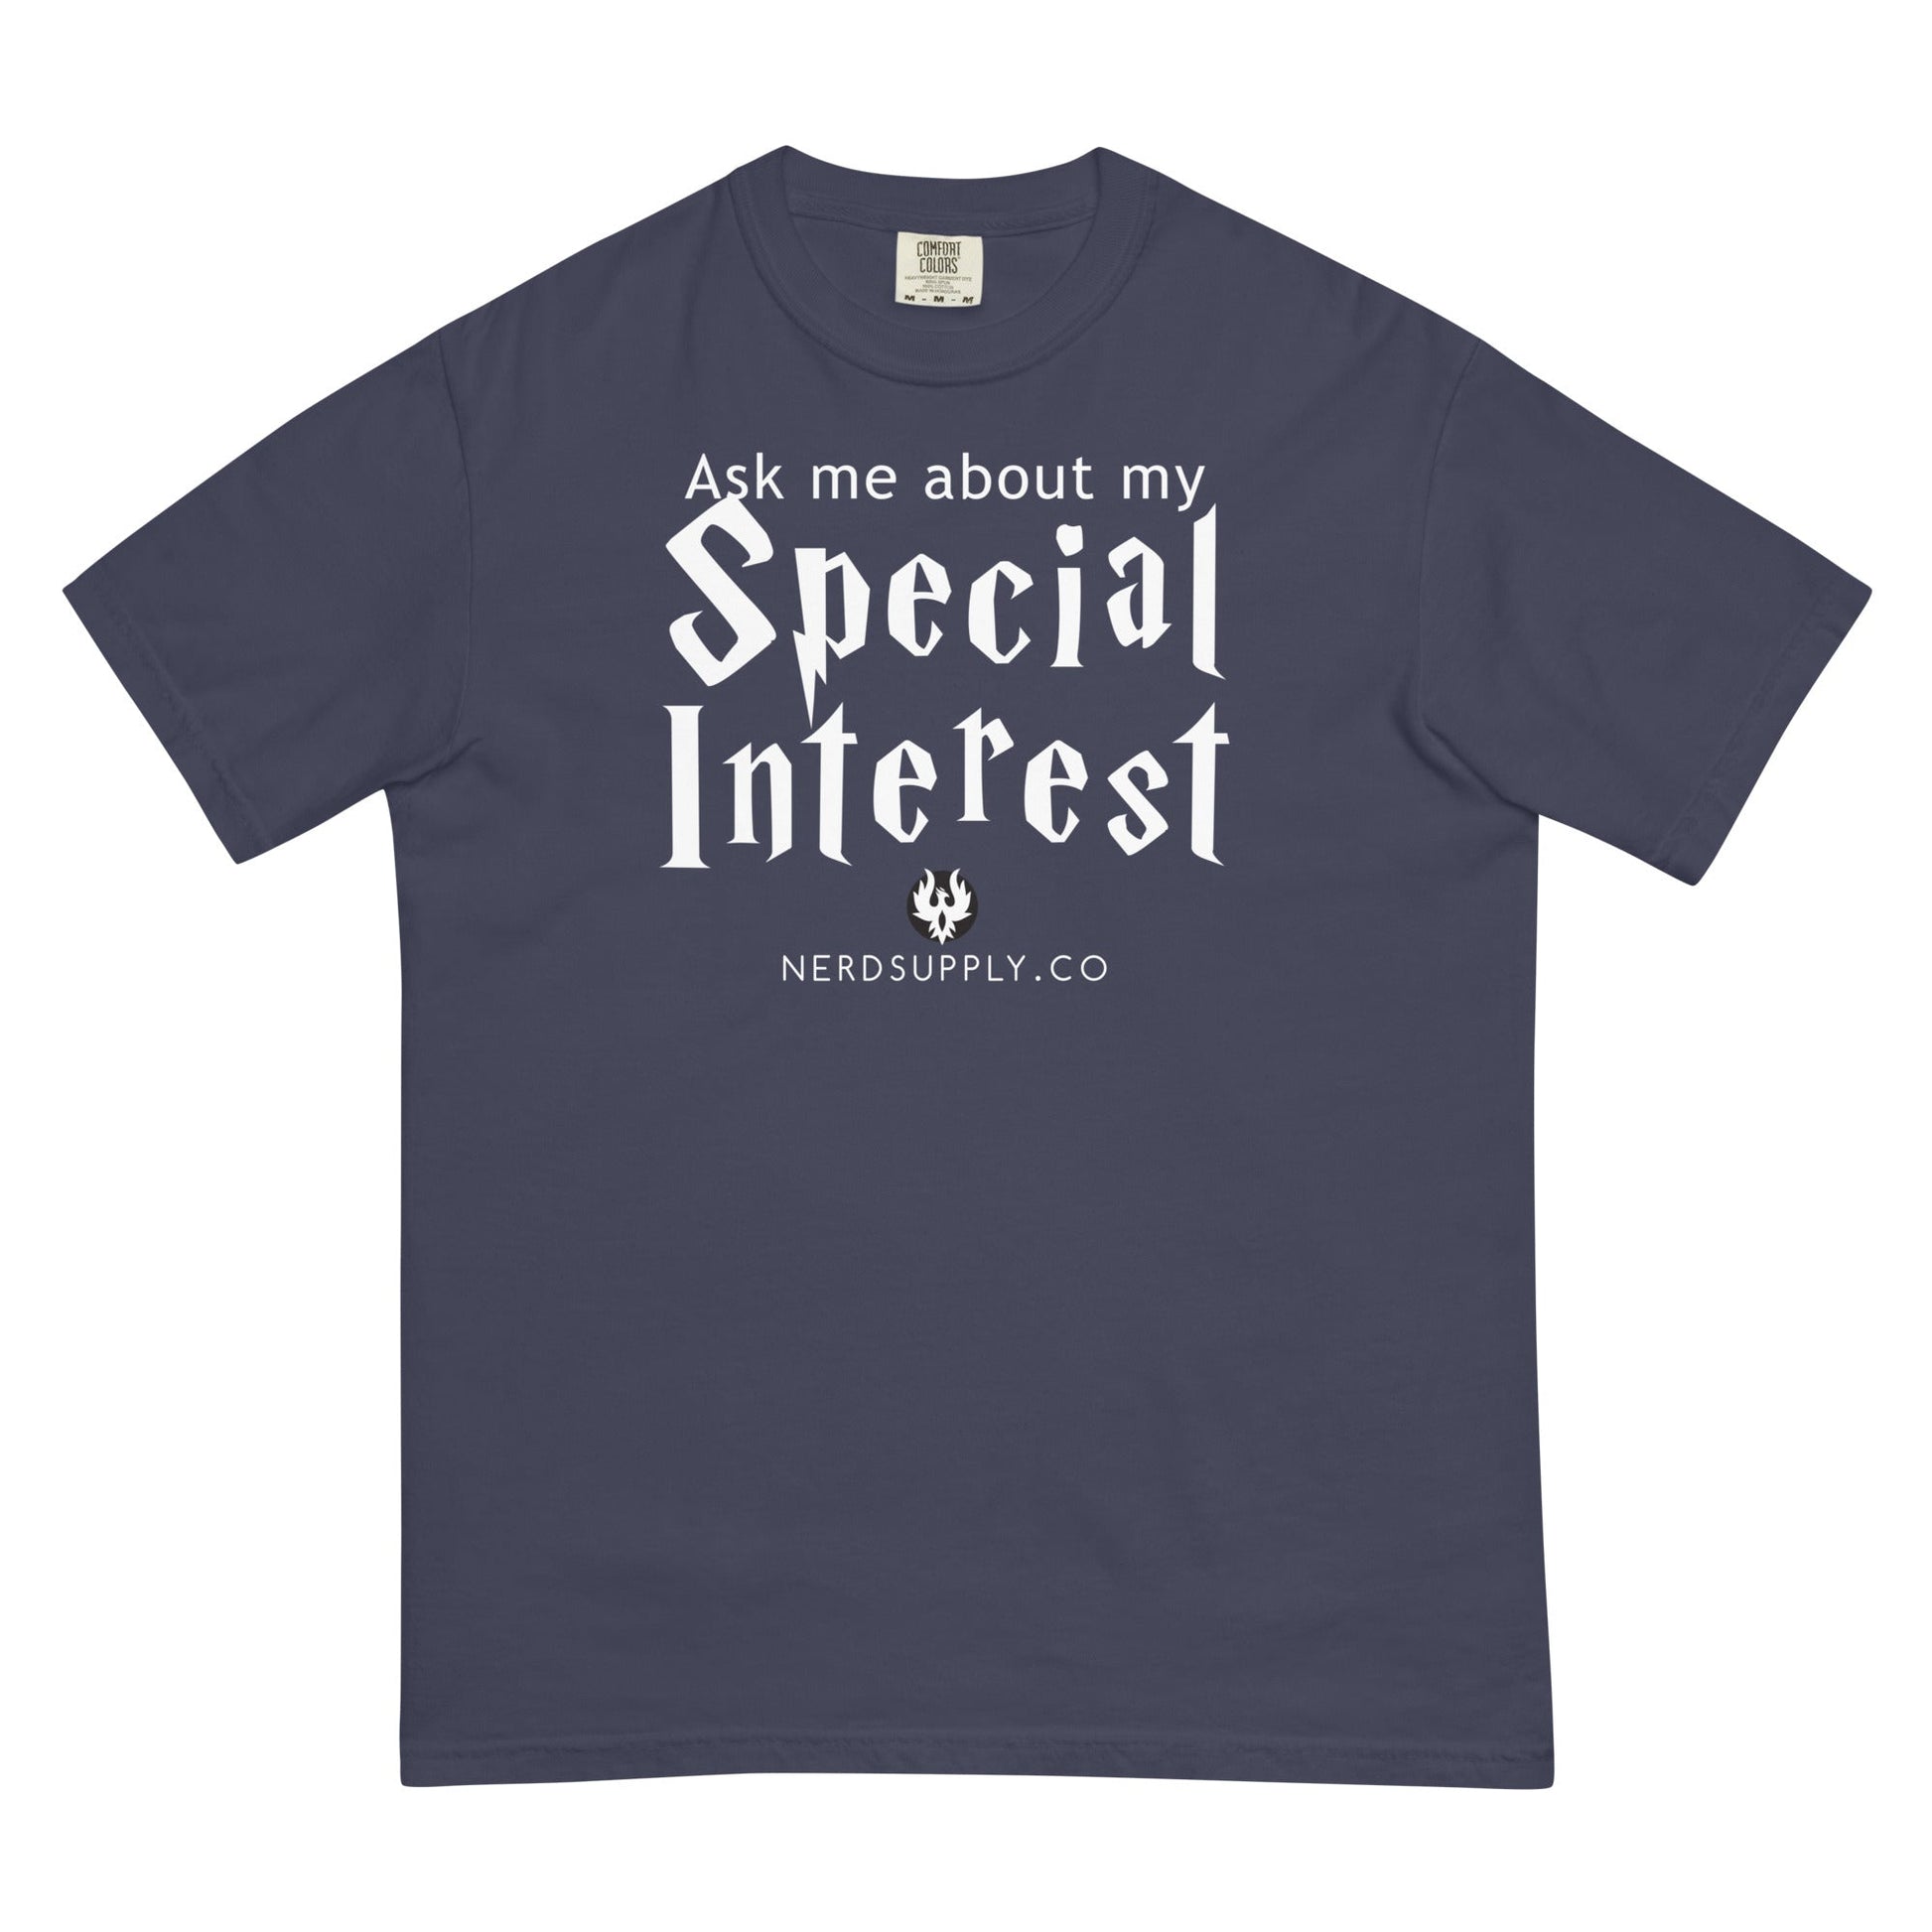 "Ask me about my Special Interest" - Potterish Font - The Nerd Supply Company